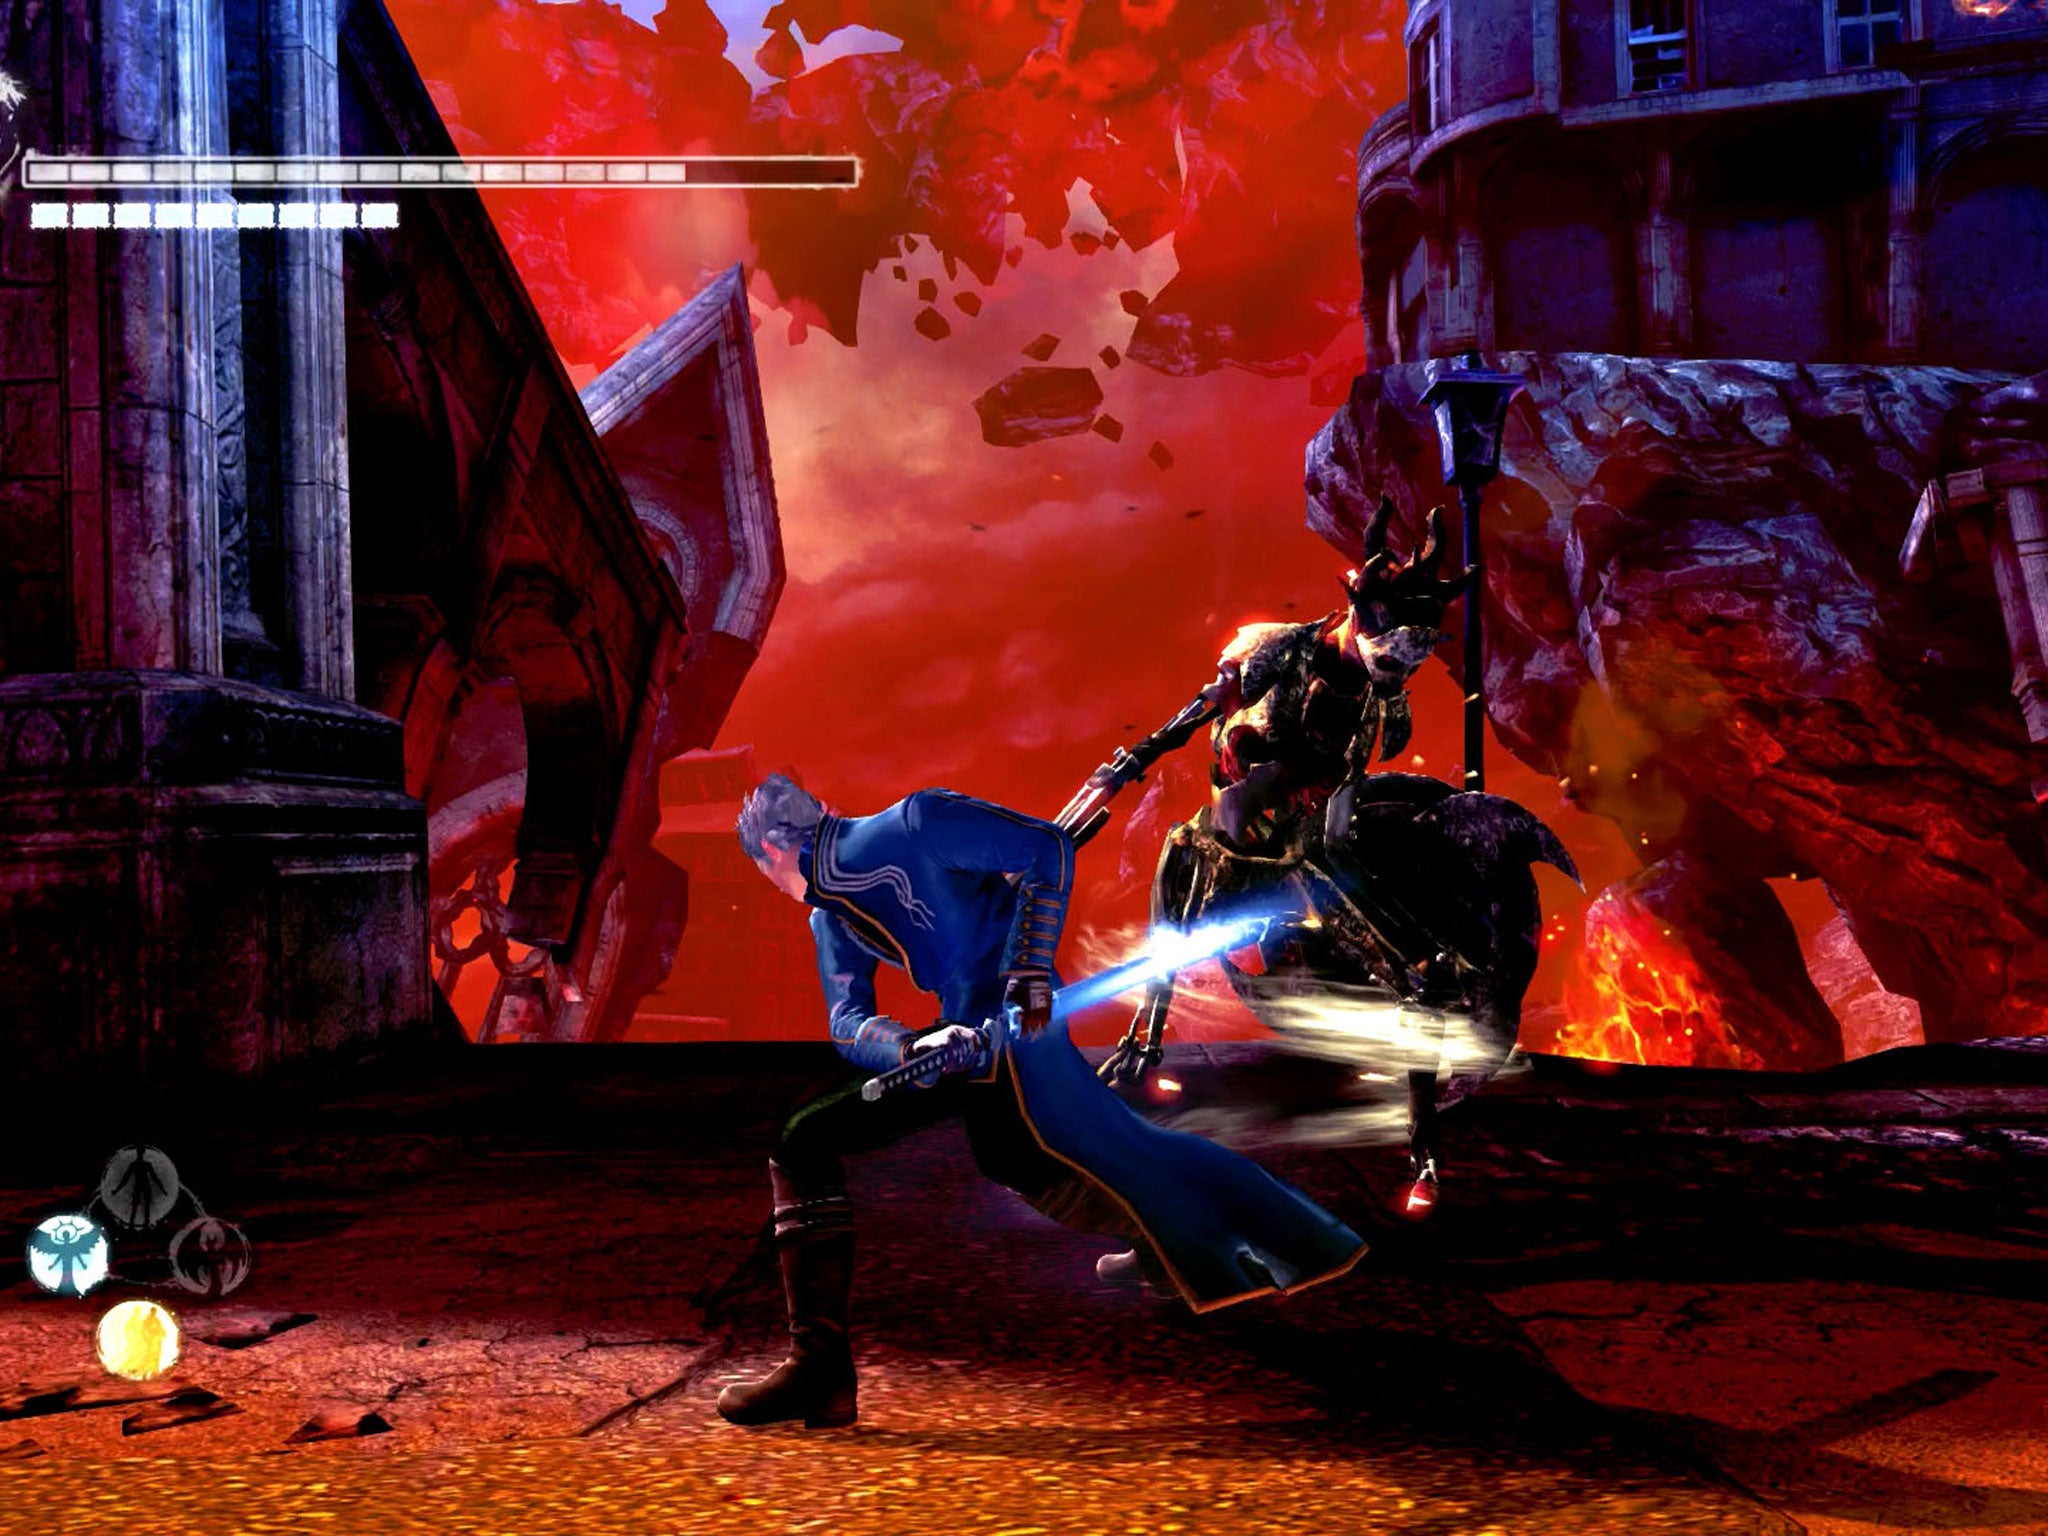 DmC Devil May Cry: Definitive Edition review